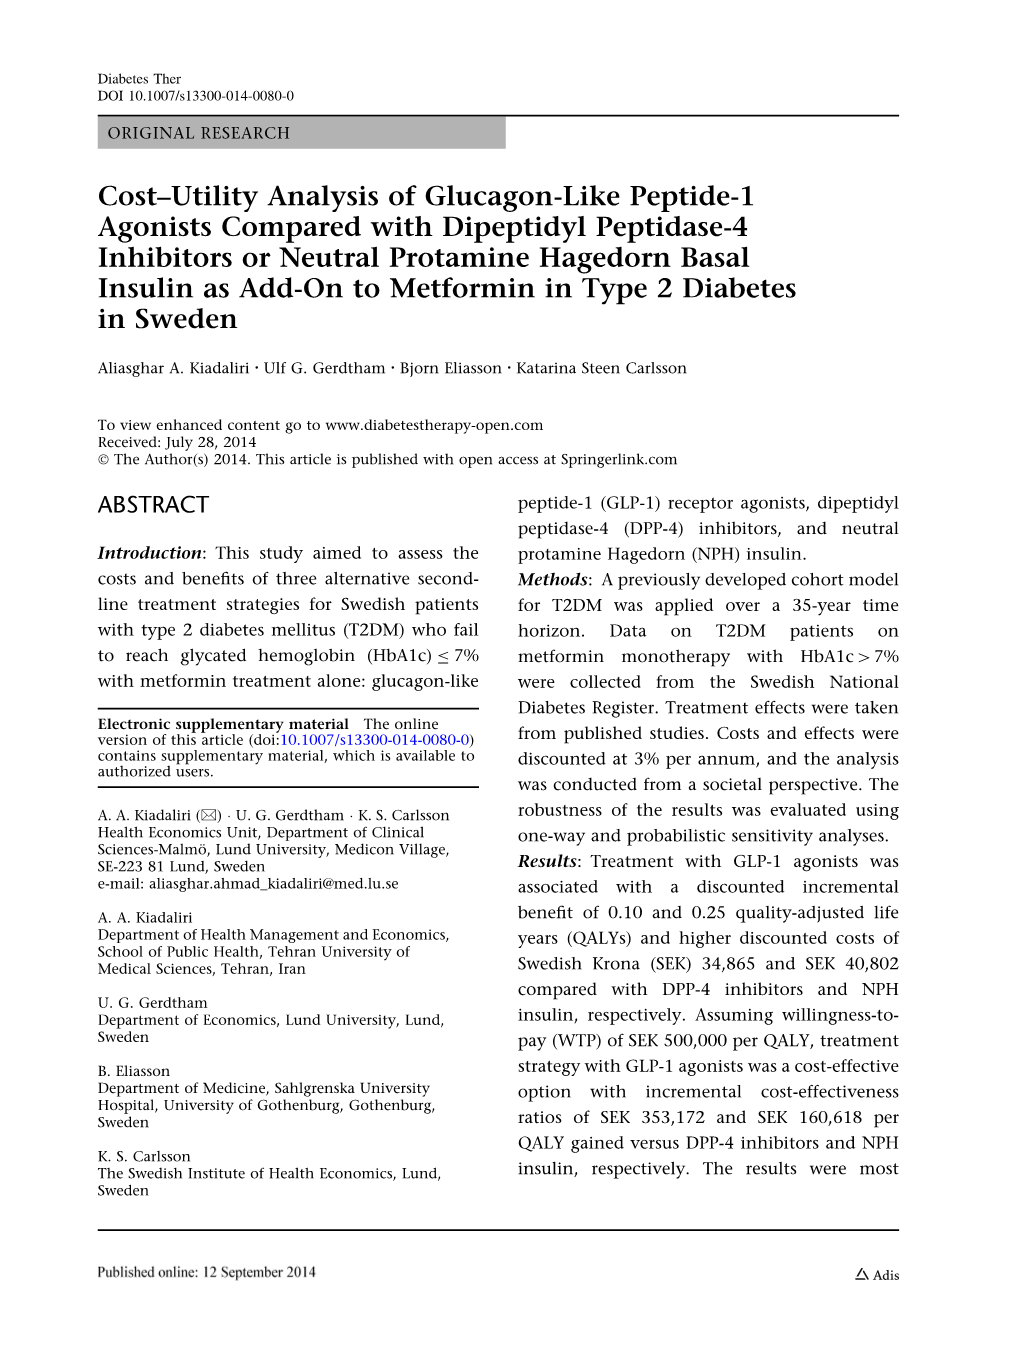 Cost–Utility Analysis of Glucagon-Like Peptide-1 Agonists